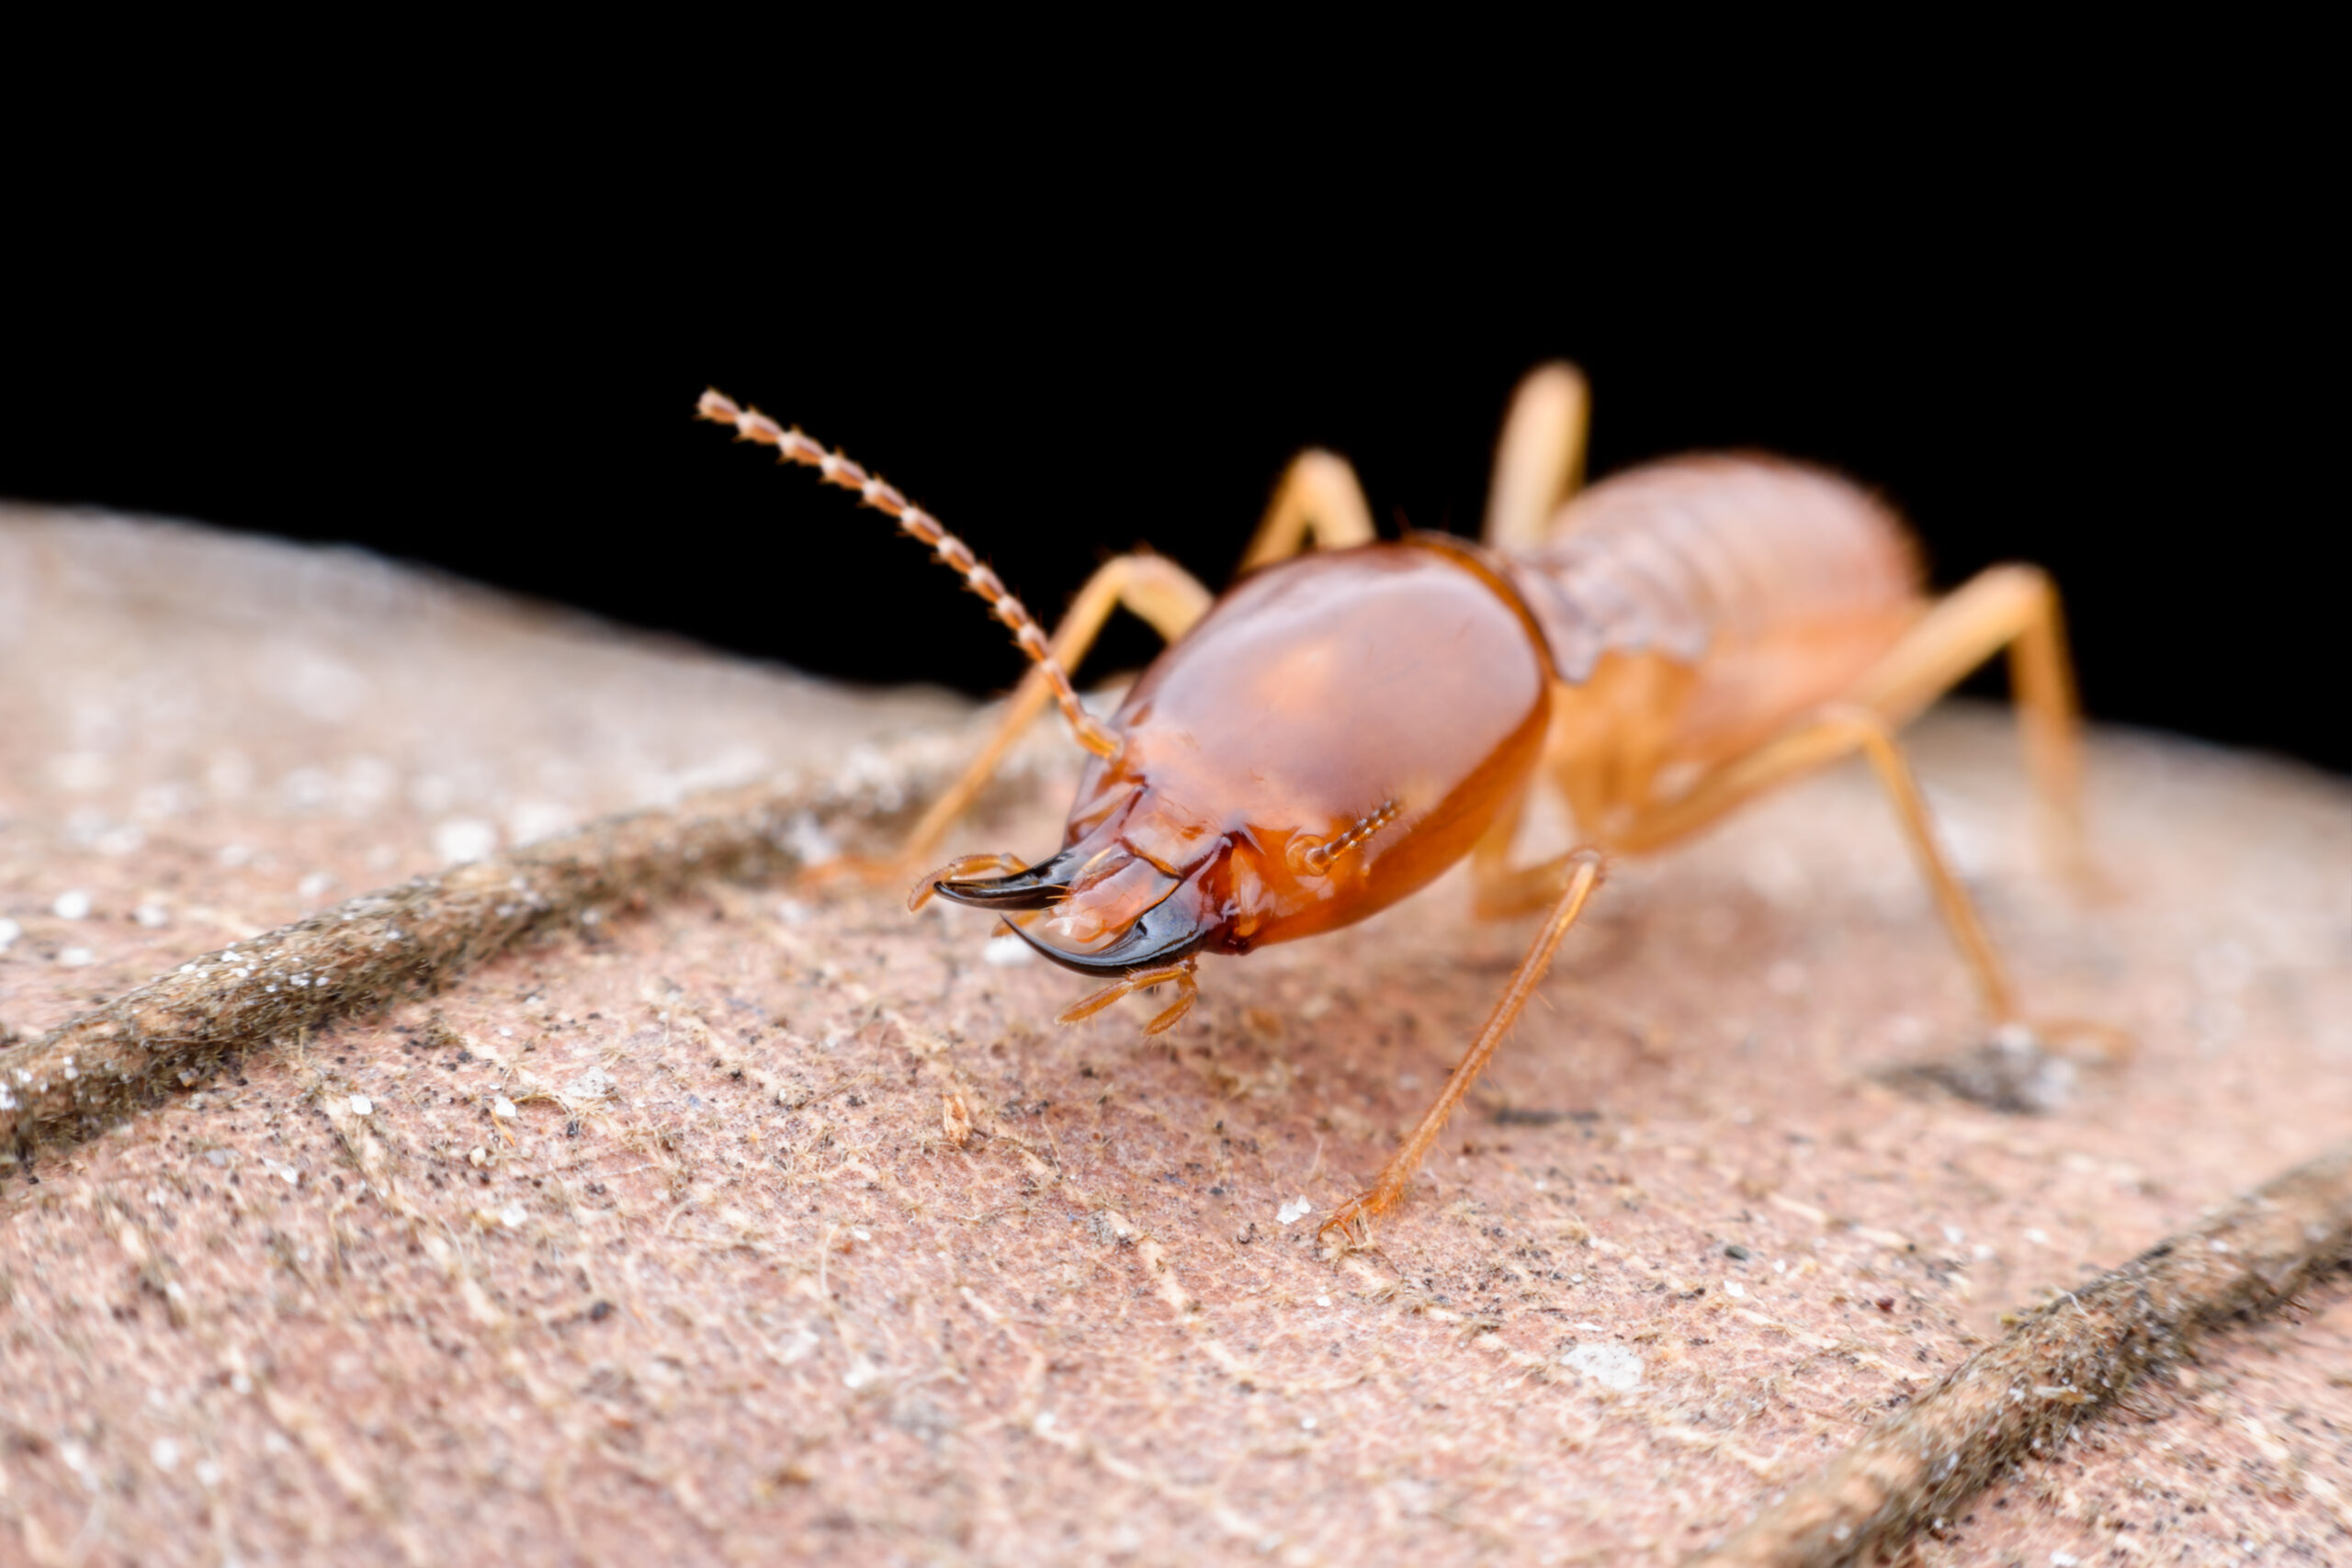 How to stop termite